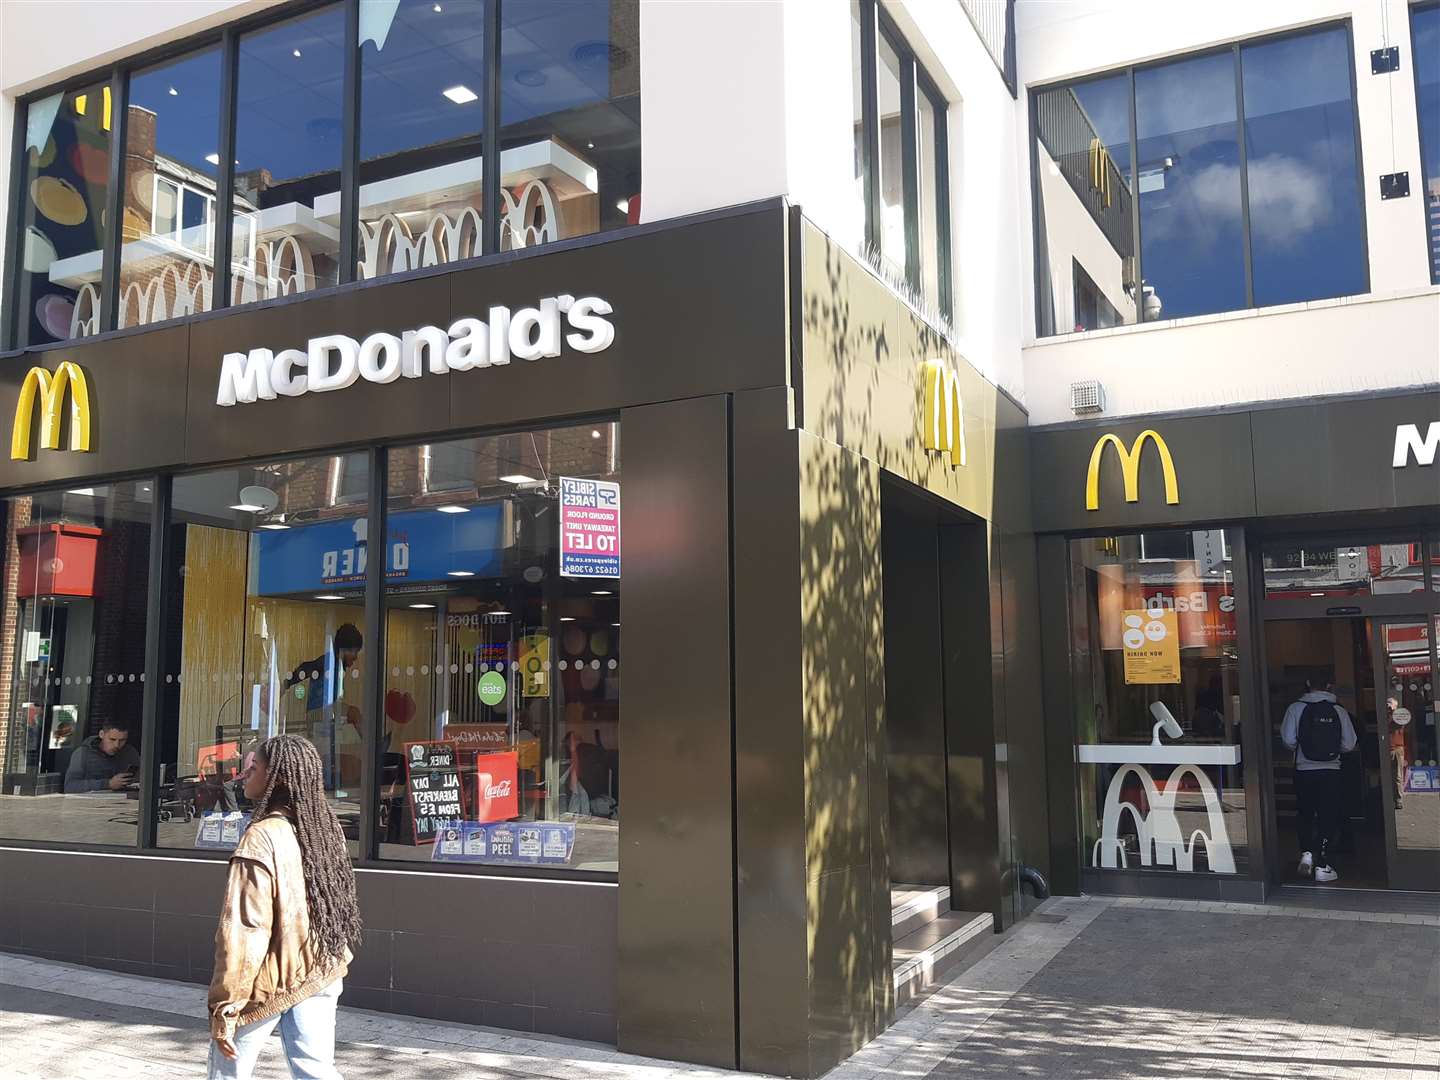 The McDonald's branch in Week Street, Maidstone. Stock image